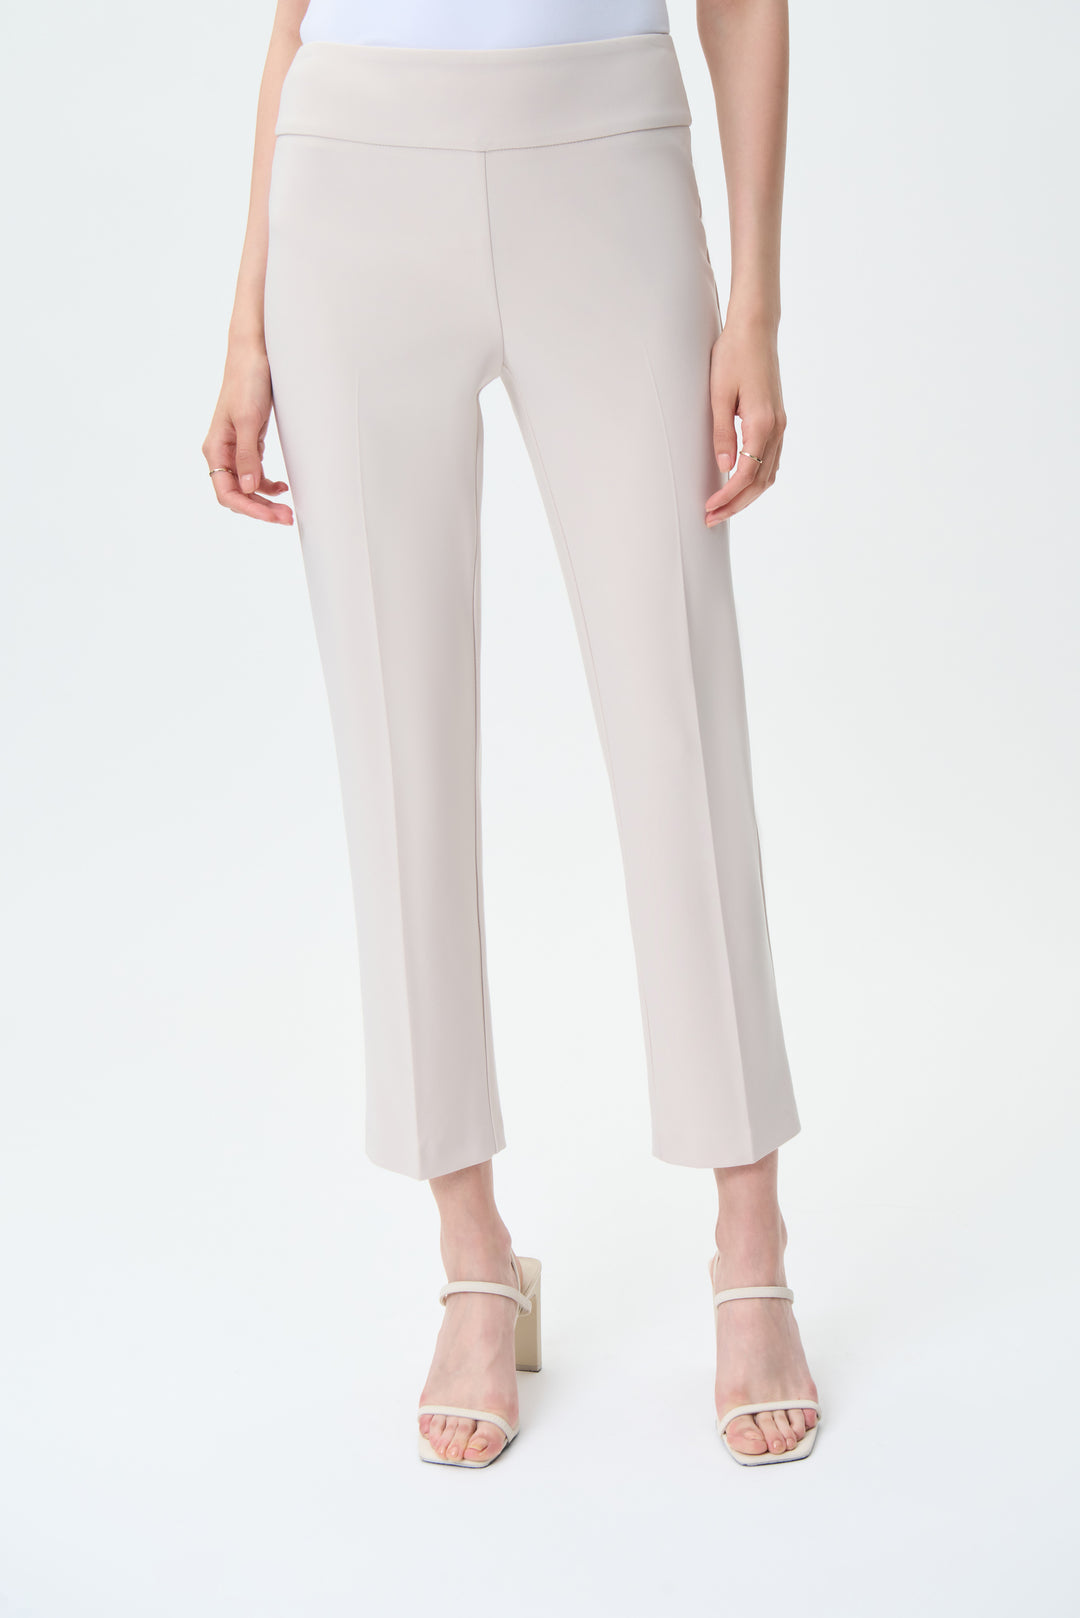 JOSEPH RIBKOFF  STYLE #181089 - 06/JC14 women's business casual cropped ankle dress pant - moonstone front